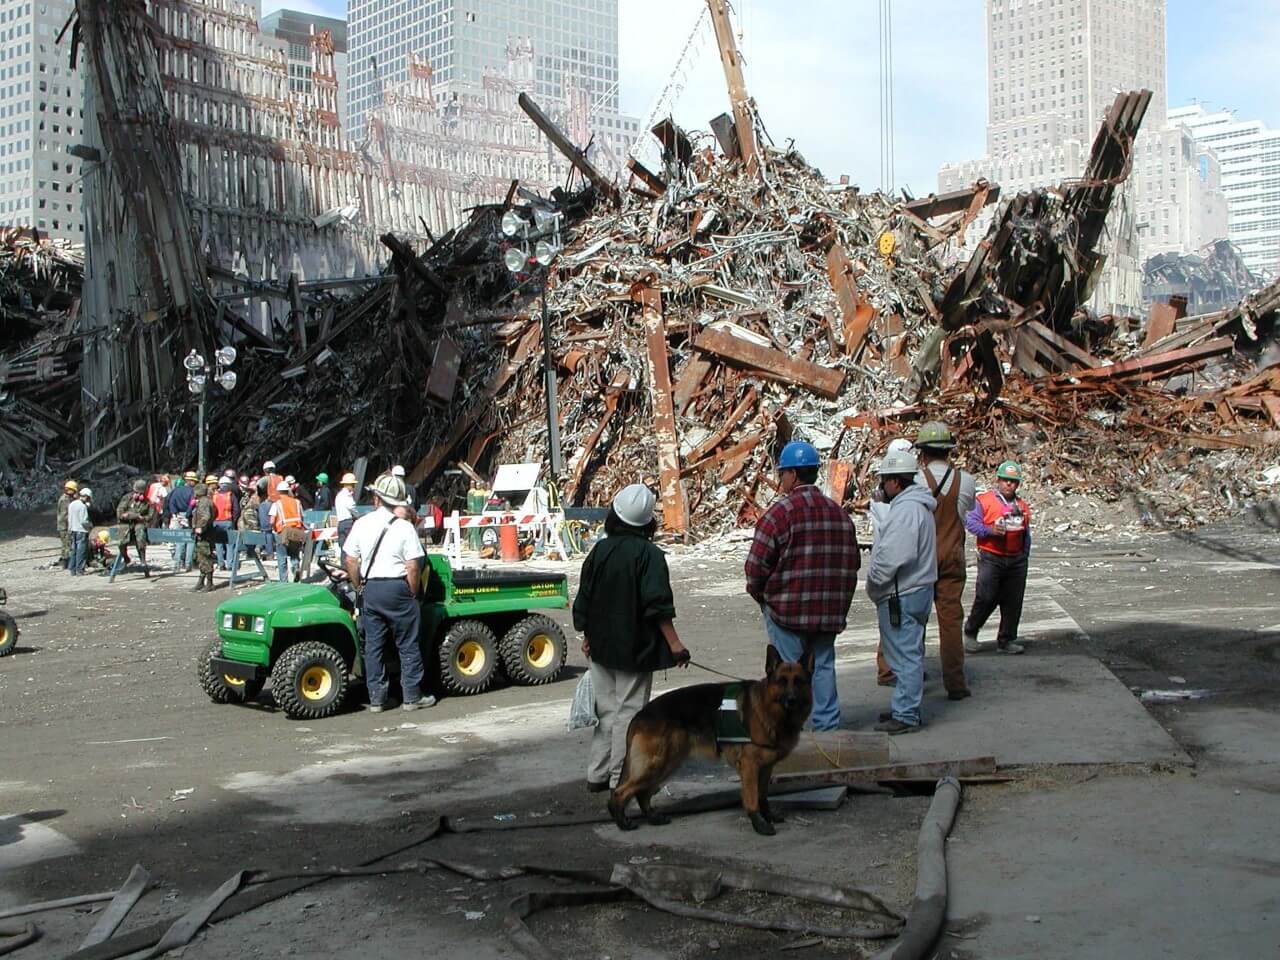 Pat Gartman and Uno at the 'Pile' at Ground Zero in the weeks following 9/11.